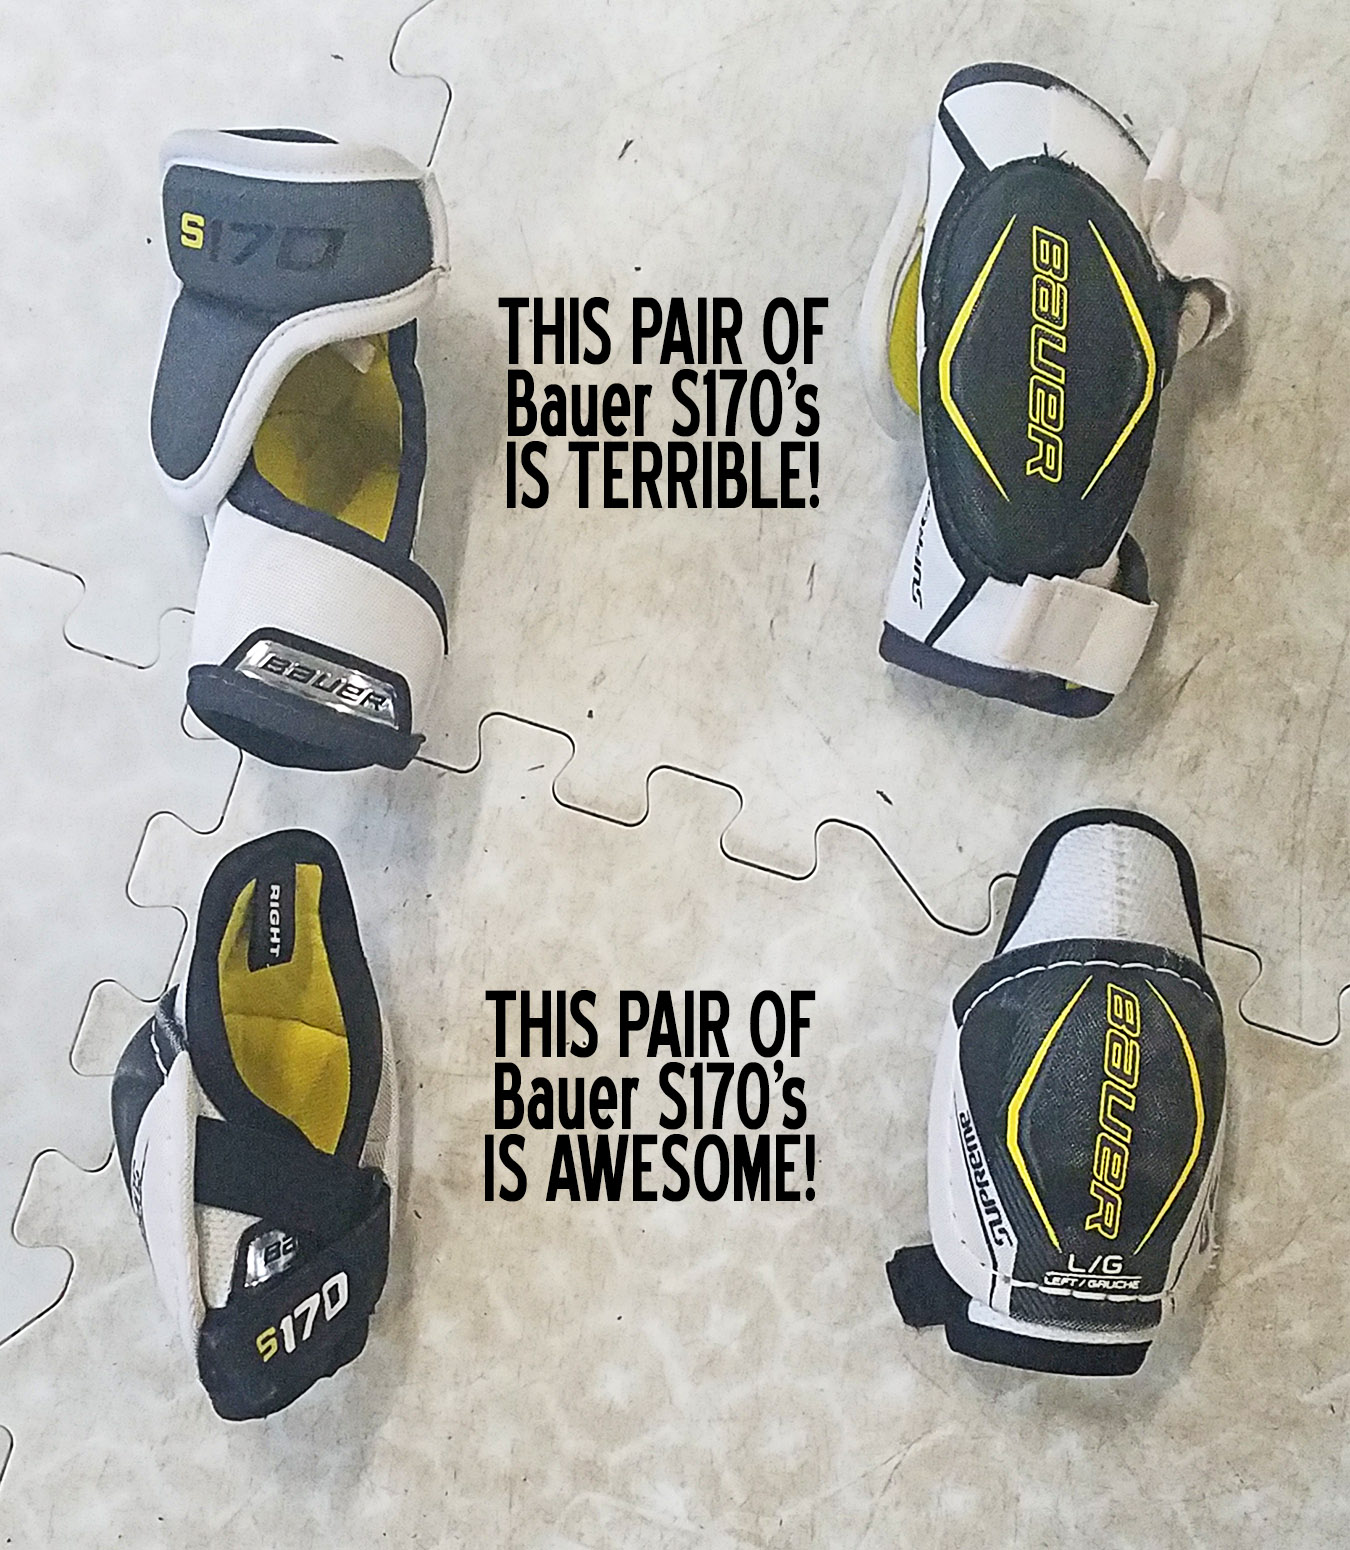 Differing Bauer S170 Elbow Pads